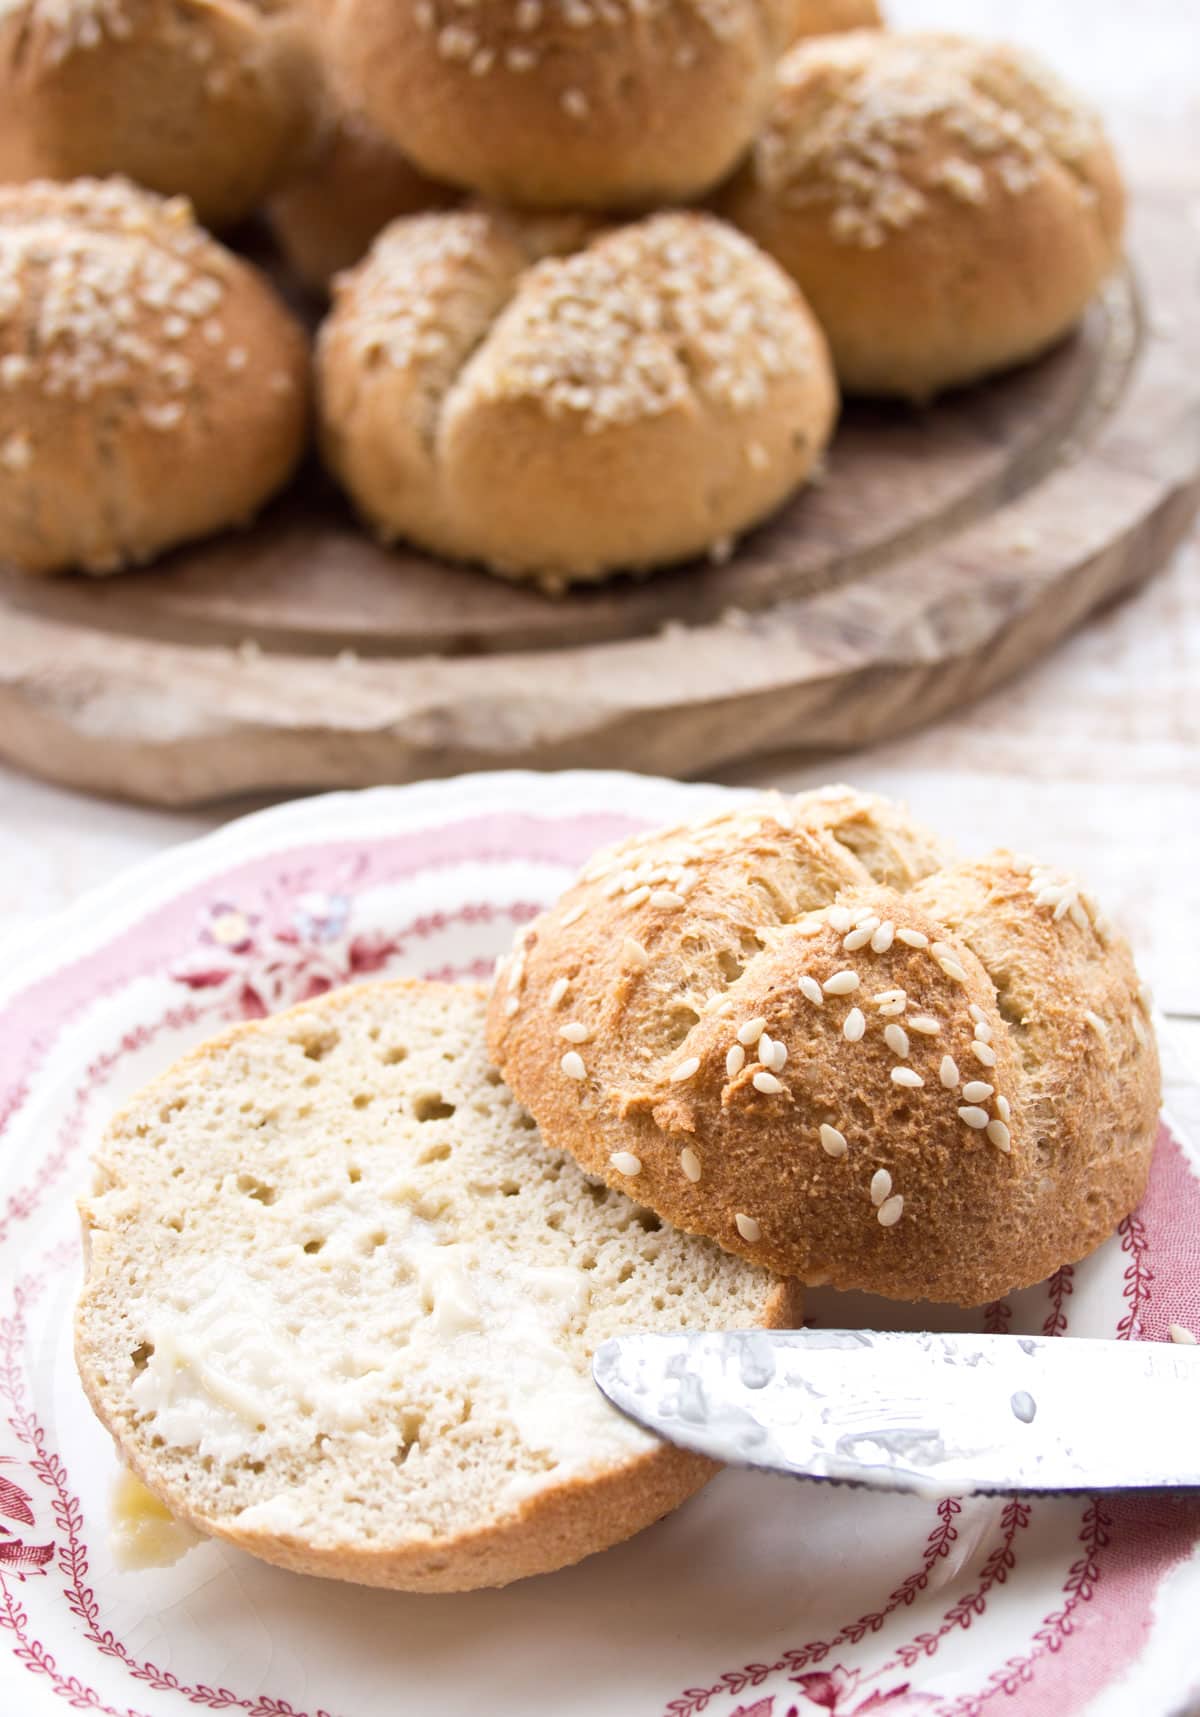 A sliced bun ith sesame seeds on a plate, spread with butter.